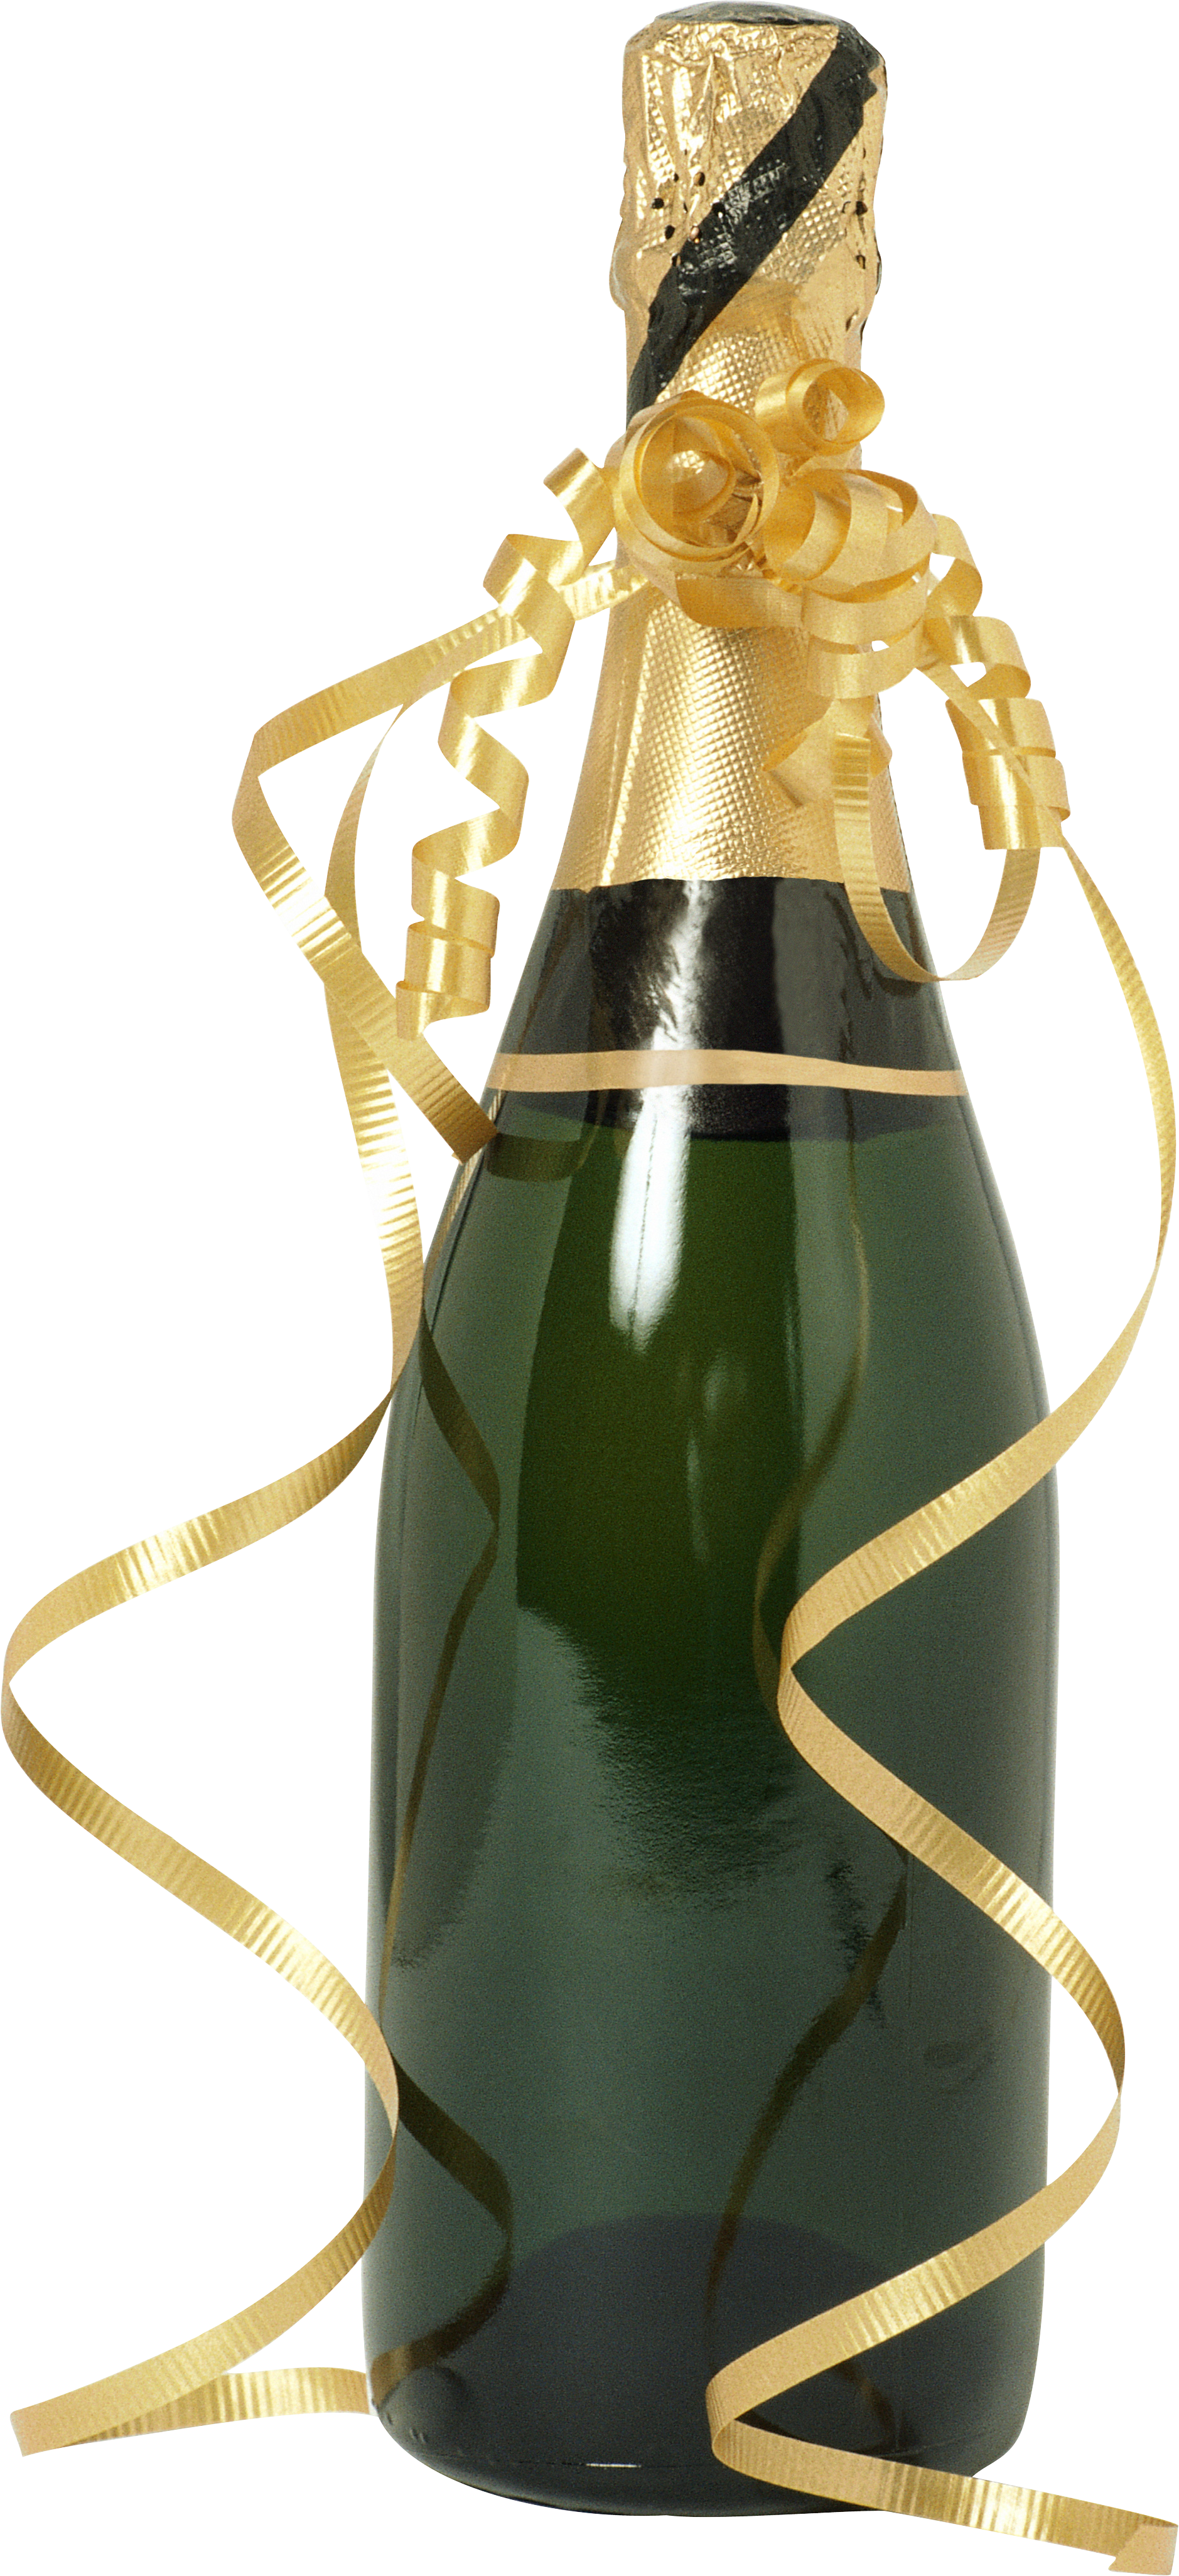 Download Champagne Bottle Png Image For Free